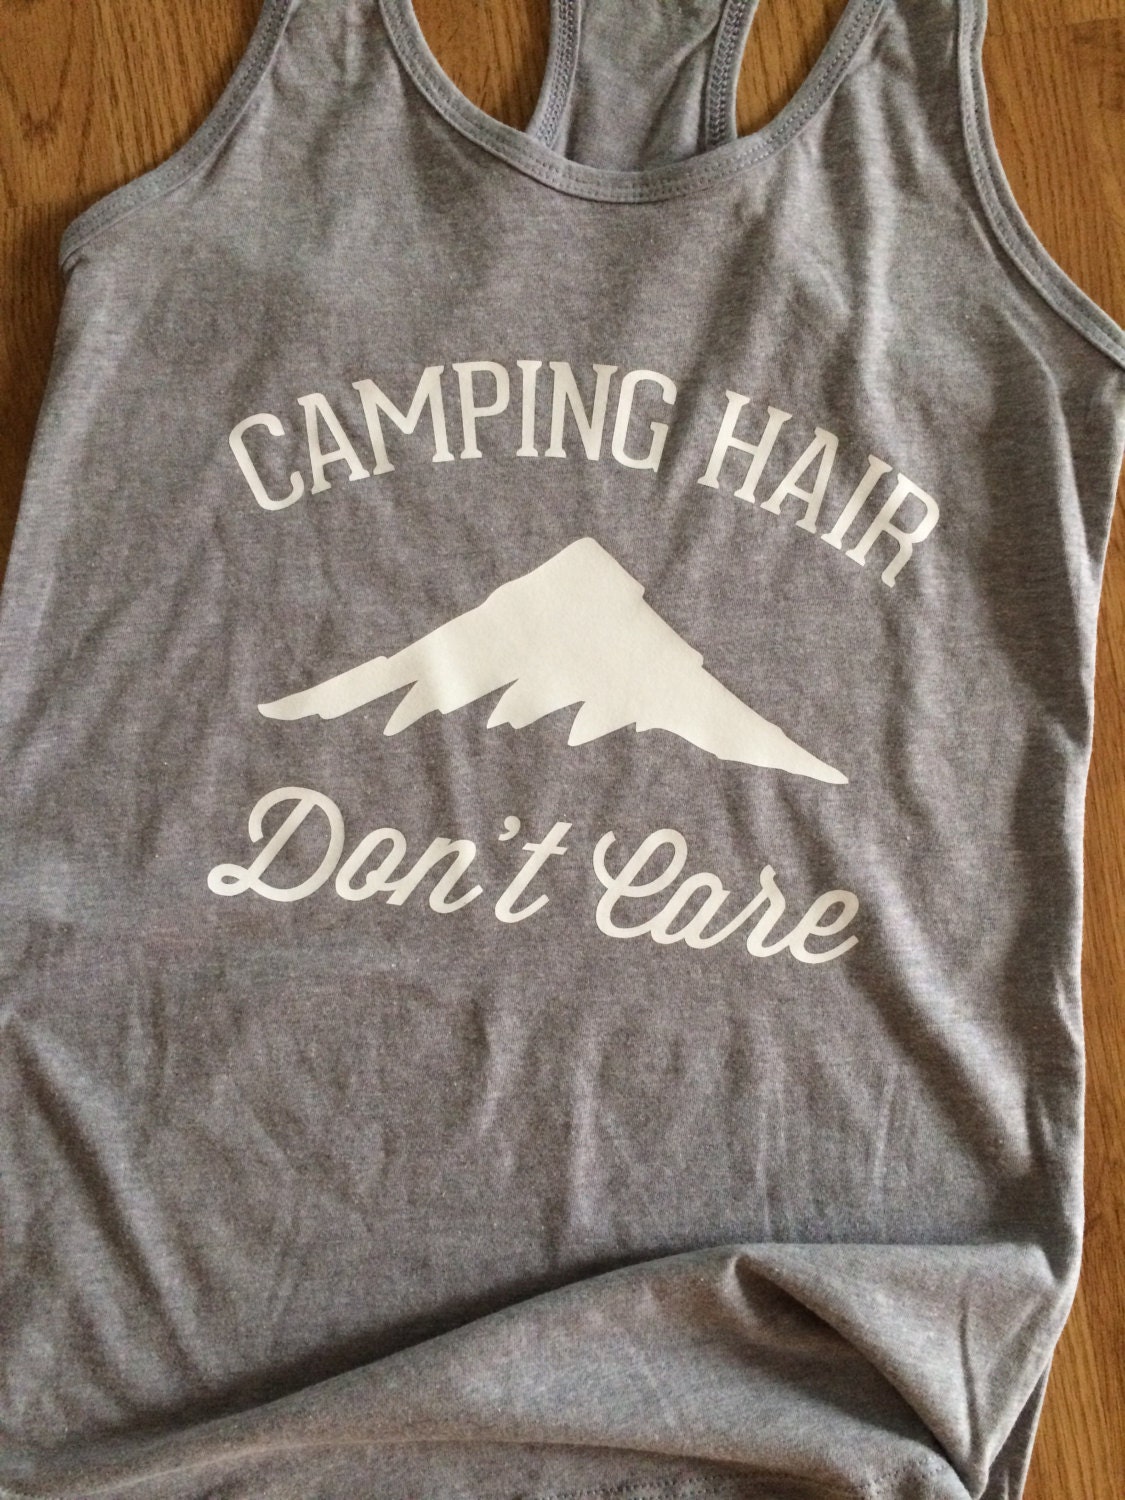 Camping Hair Don't Care Tank Top Mountain Tank Top Camp | Etsy